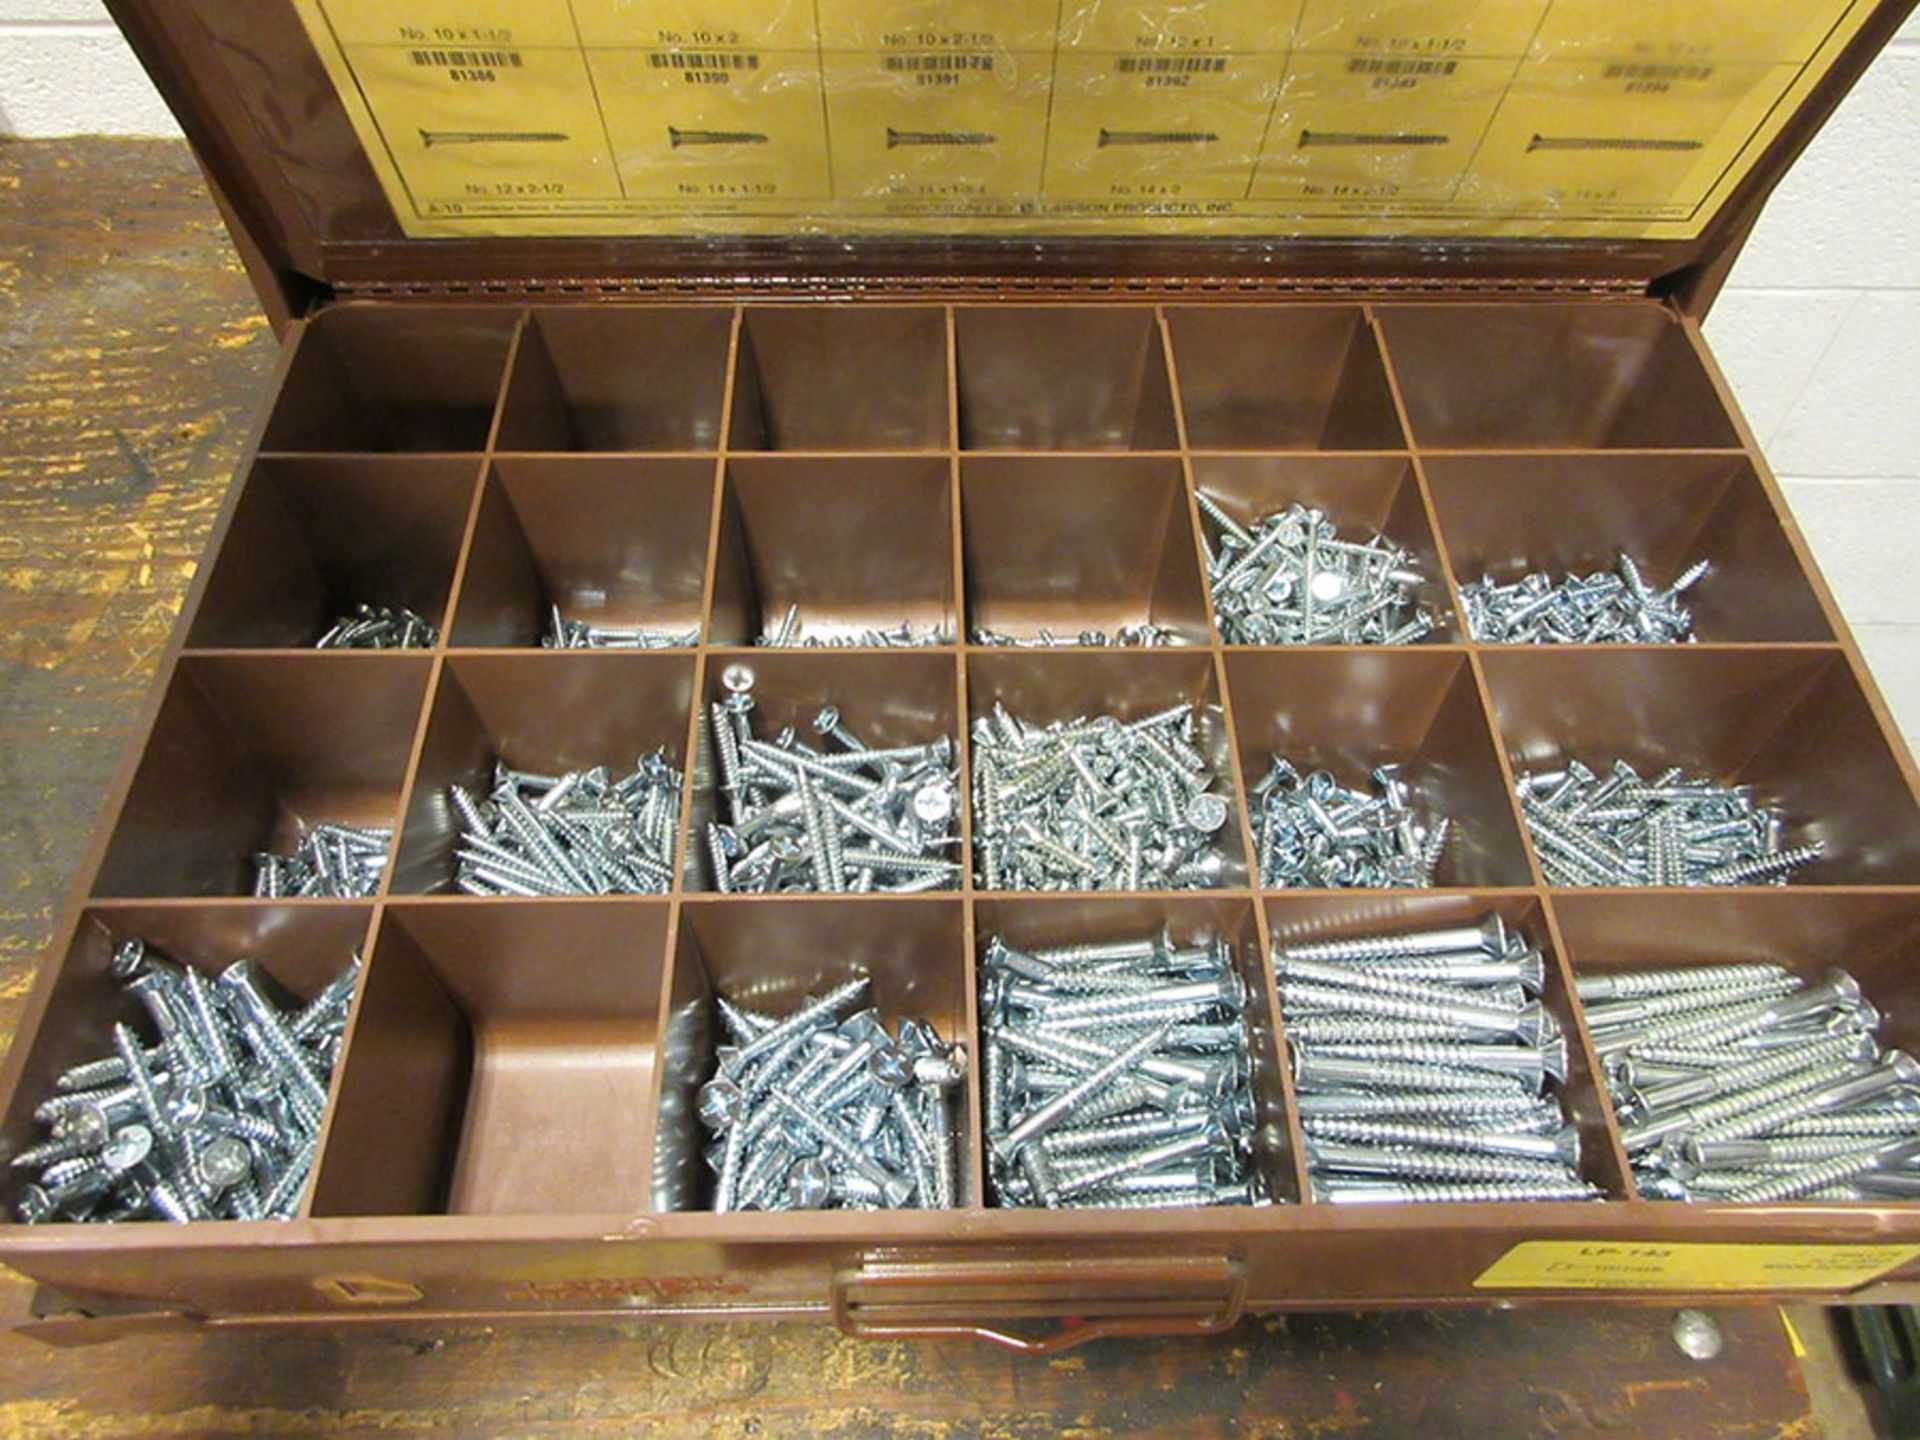 LAWSON PRODUCTS SMALL PARTS BIN WITH CONTENTS; WASHERS, SCREWS, AND CABLE TIES - Image 2 of 3